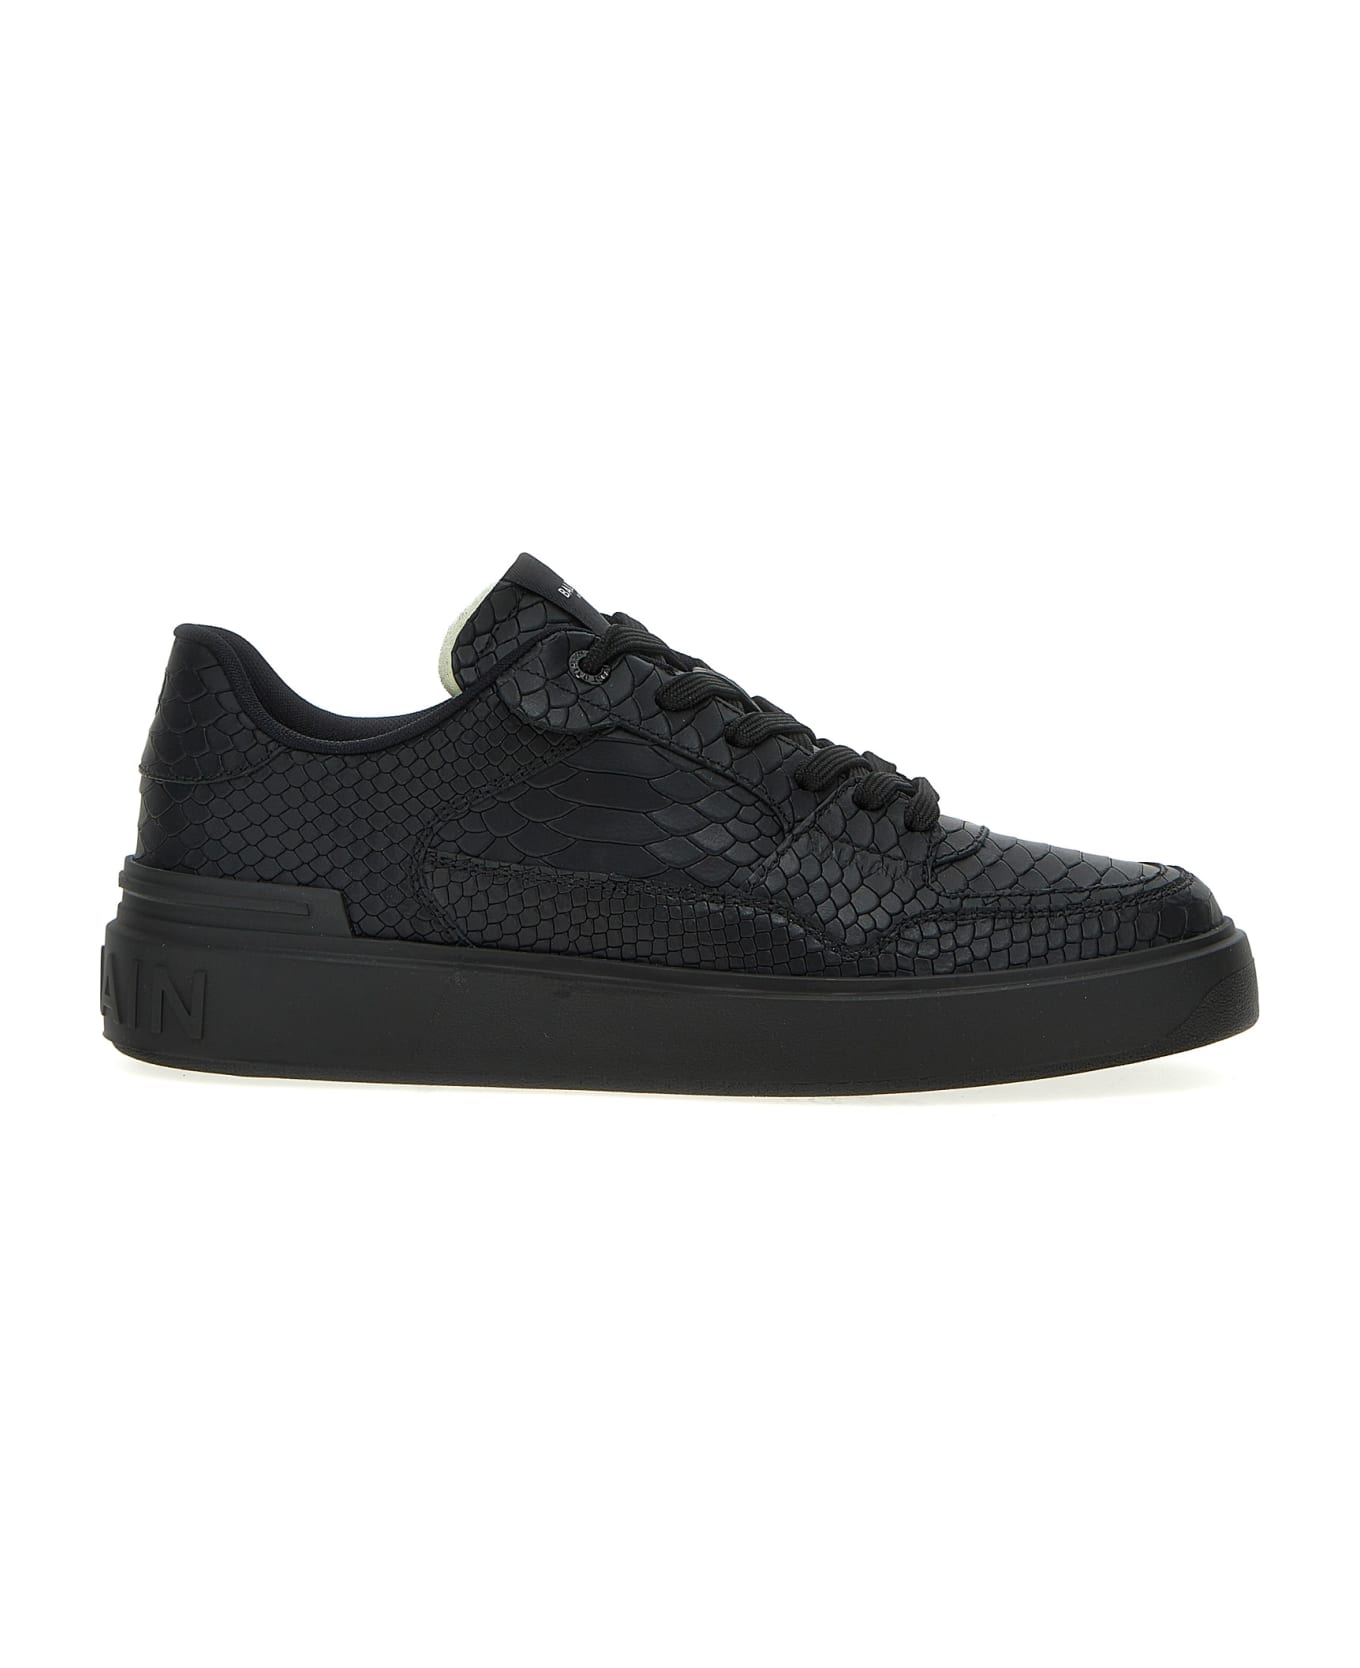 Balmain B-court Leather And Leather Sneakers - Black